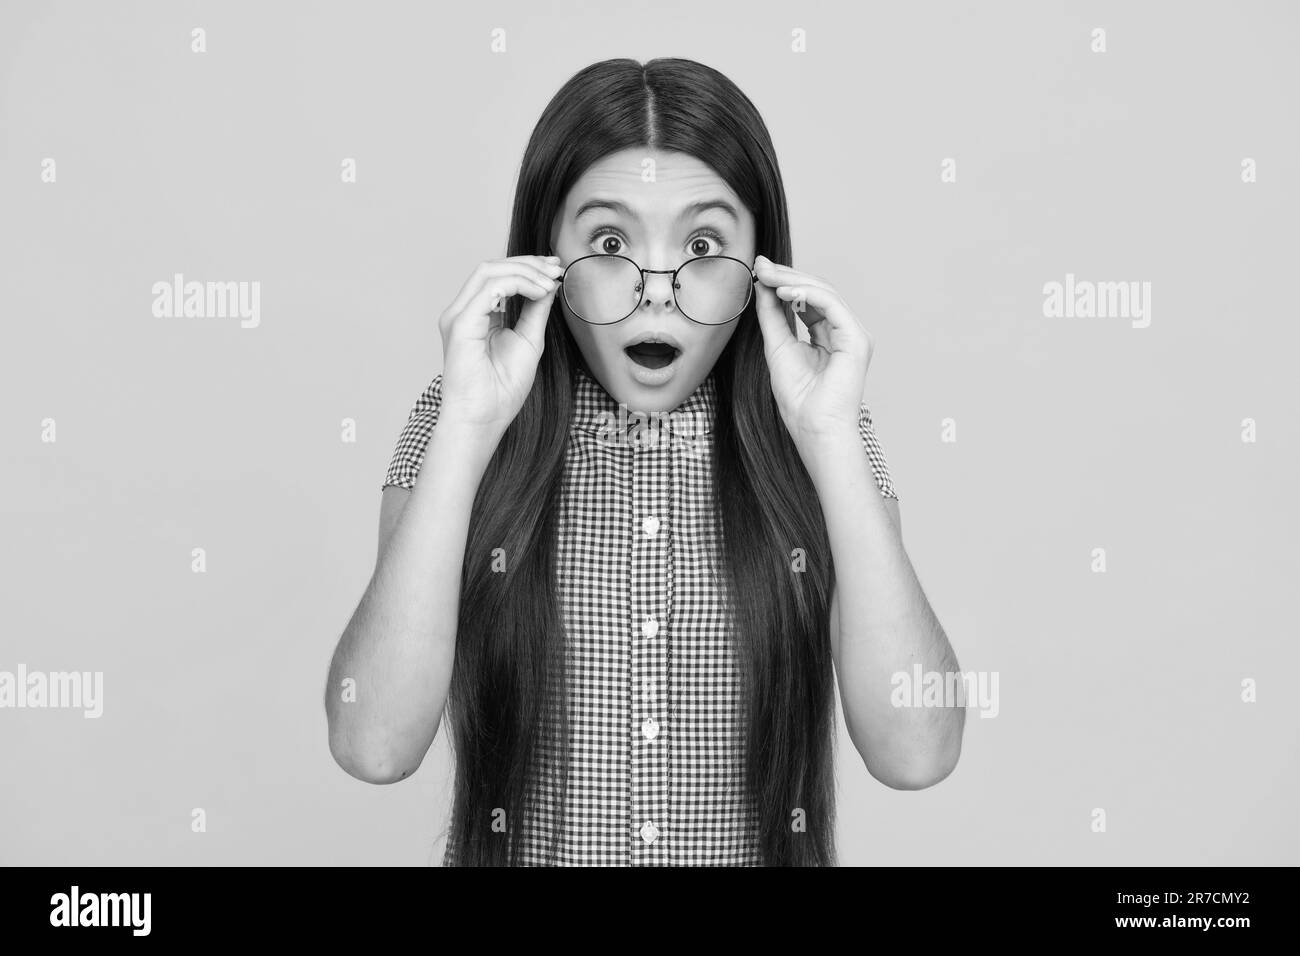 Preteen girl mouth open Black and White Stock Photos & Images - Alamy